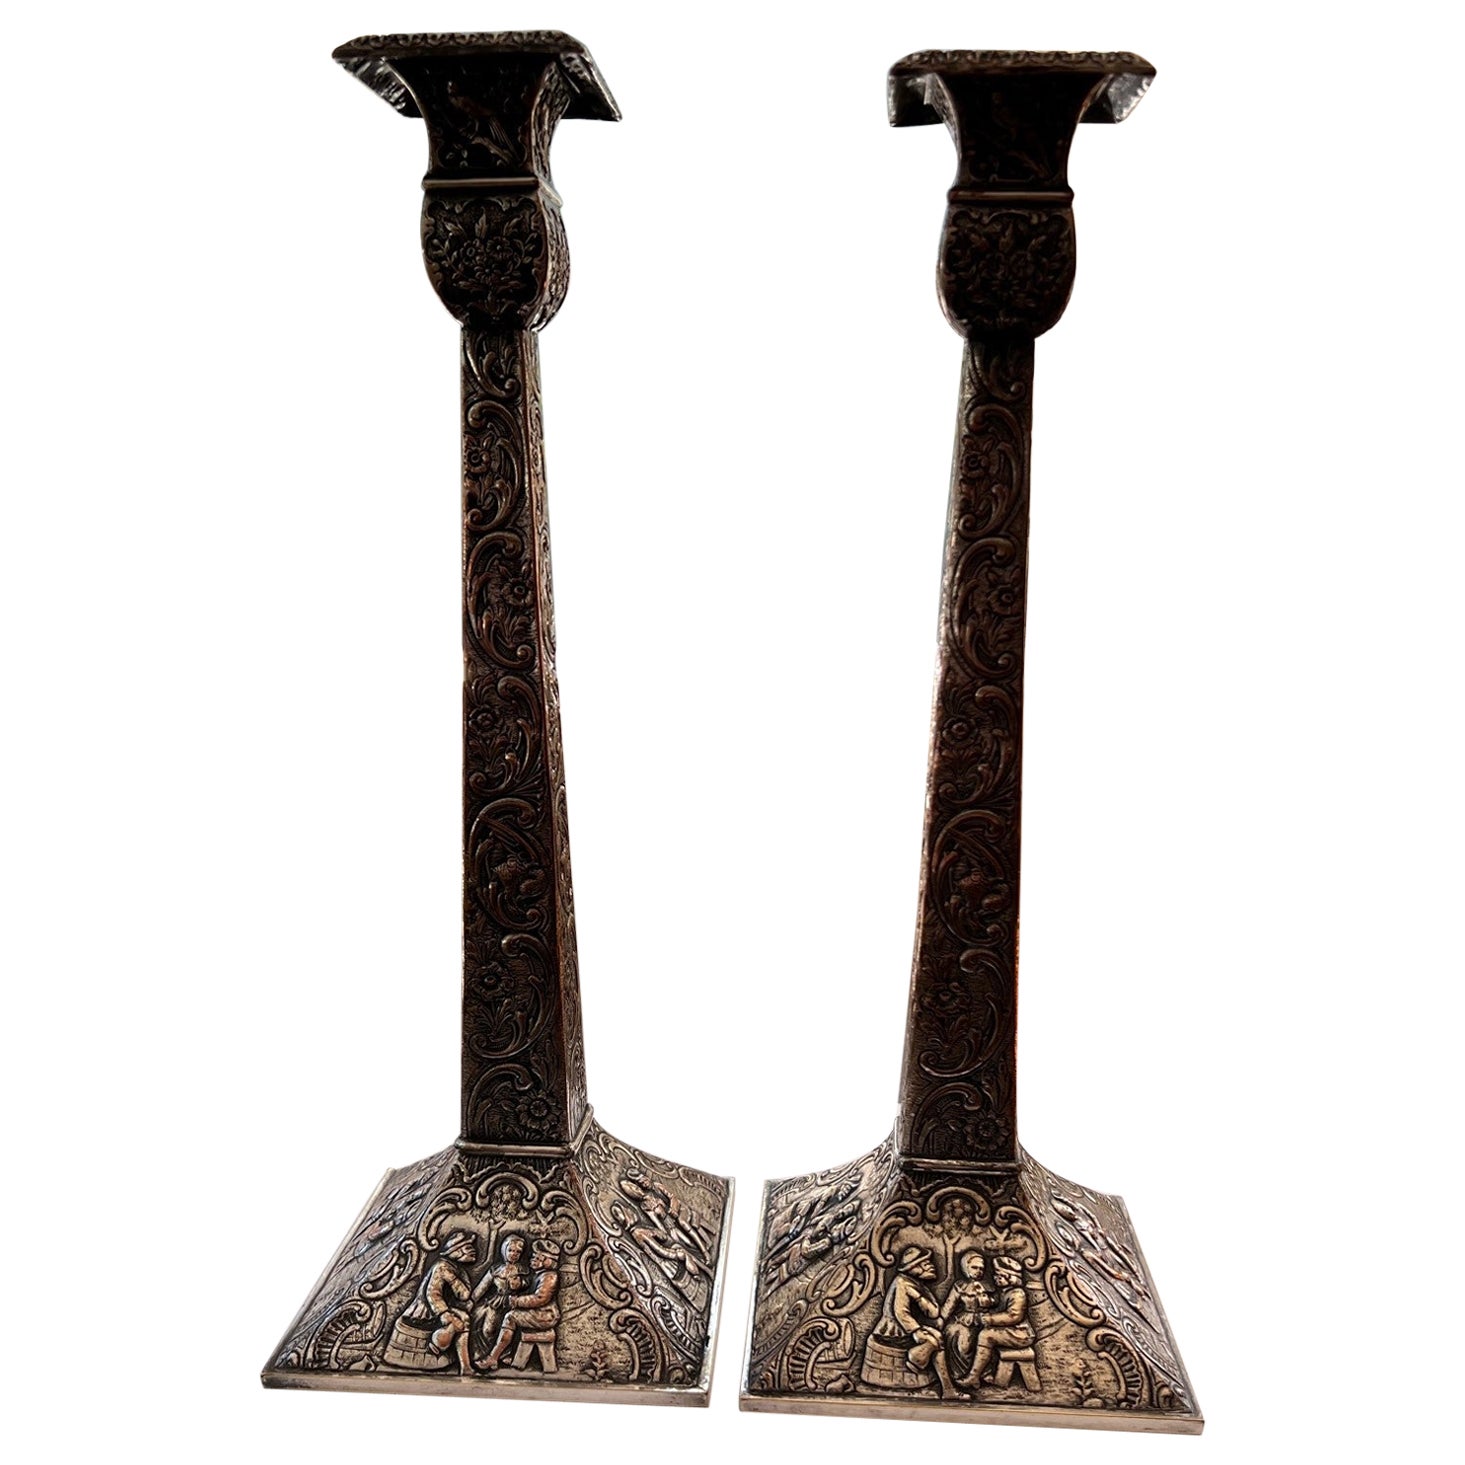 Antique Pair of E.G. Webster and Son. Silverplate Repoussé Tavern Candlesticks For Sale